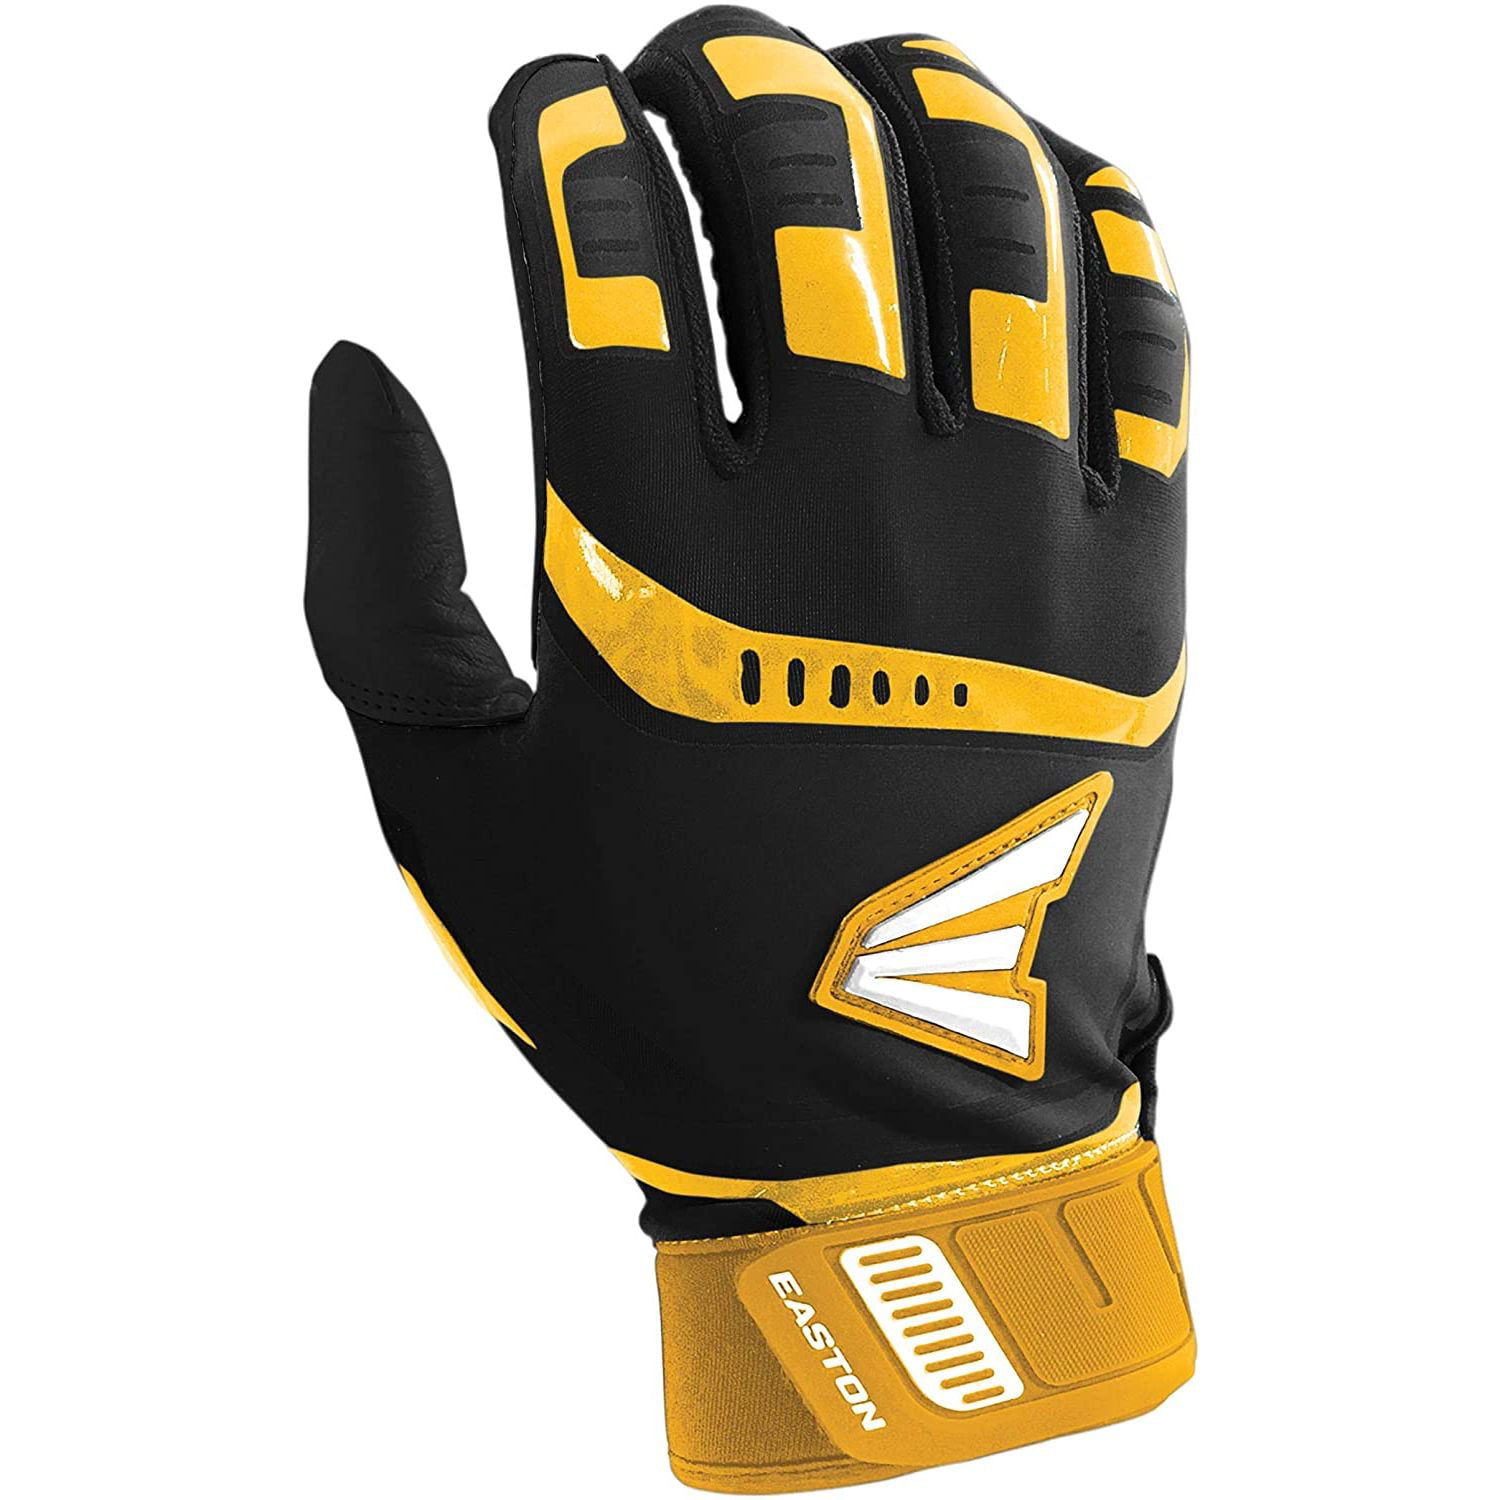 Pair 2021 Adult and Youth EASTON WALK-OFF Batting Glove Series 